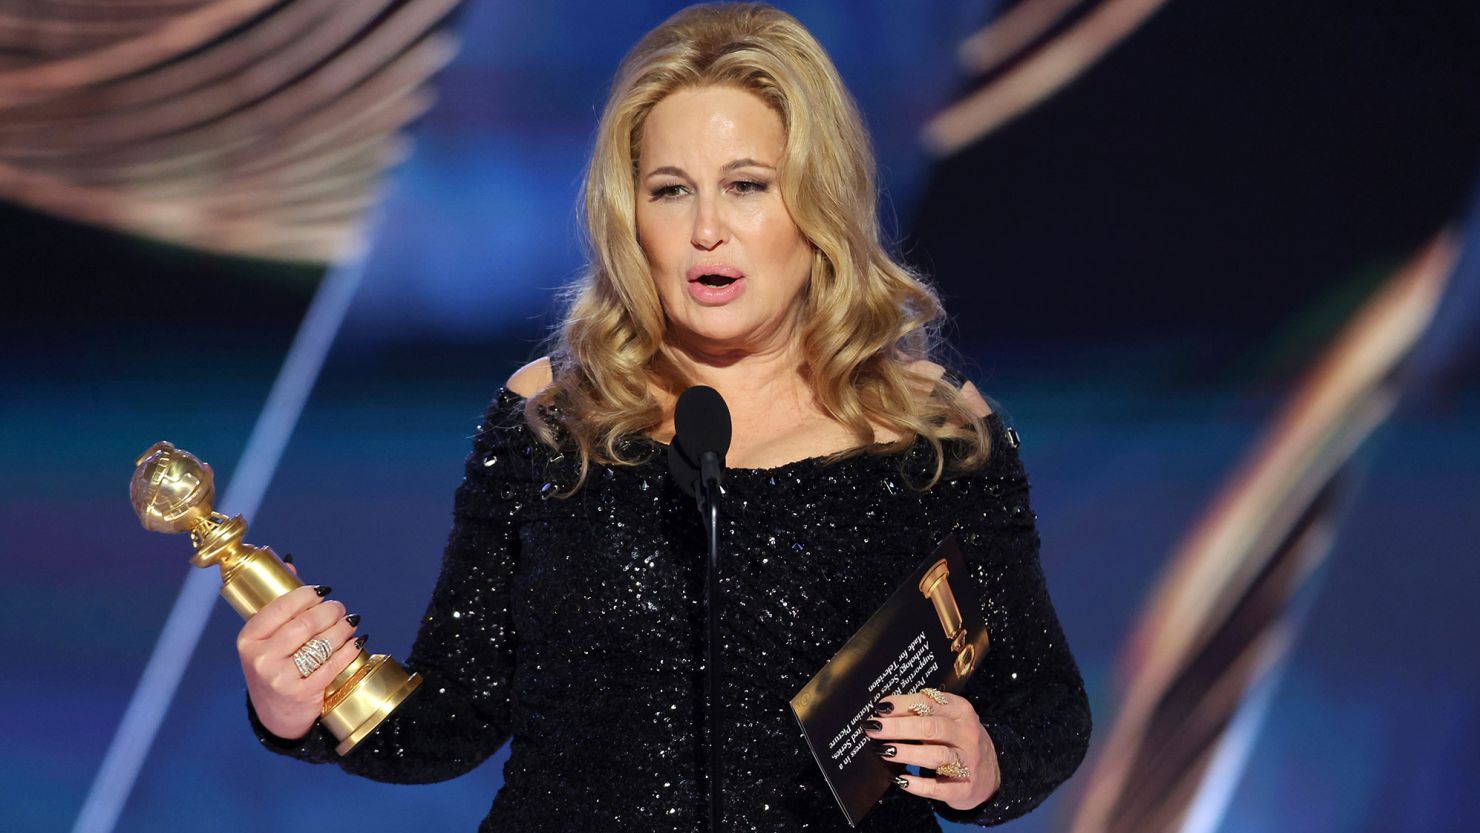 Jennifer Coolidge accepts an award for "The White Lotus" during the 80th Annual Golden Globe Awards on Tuesday.